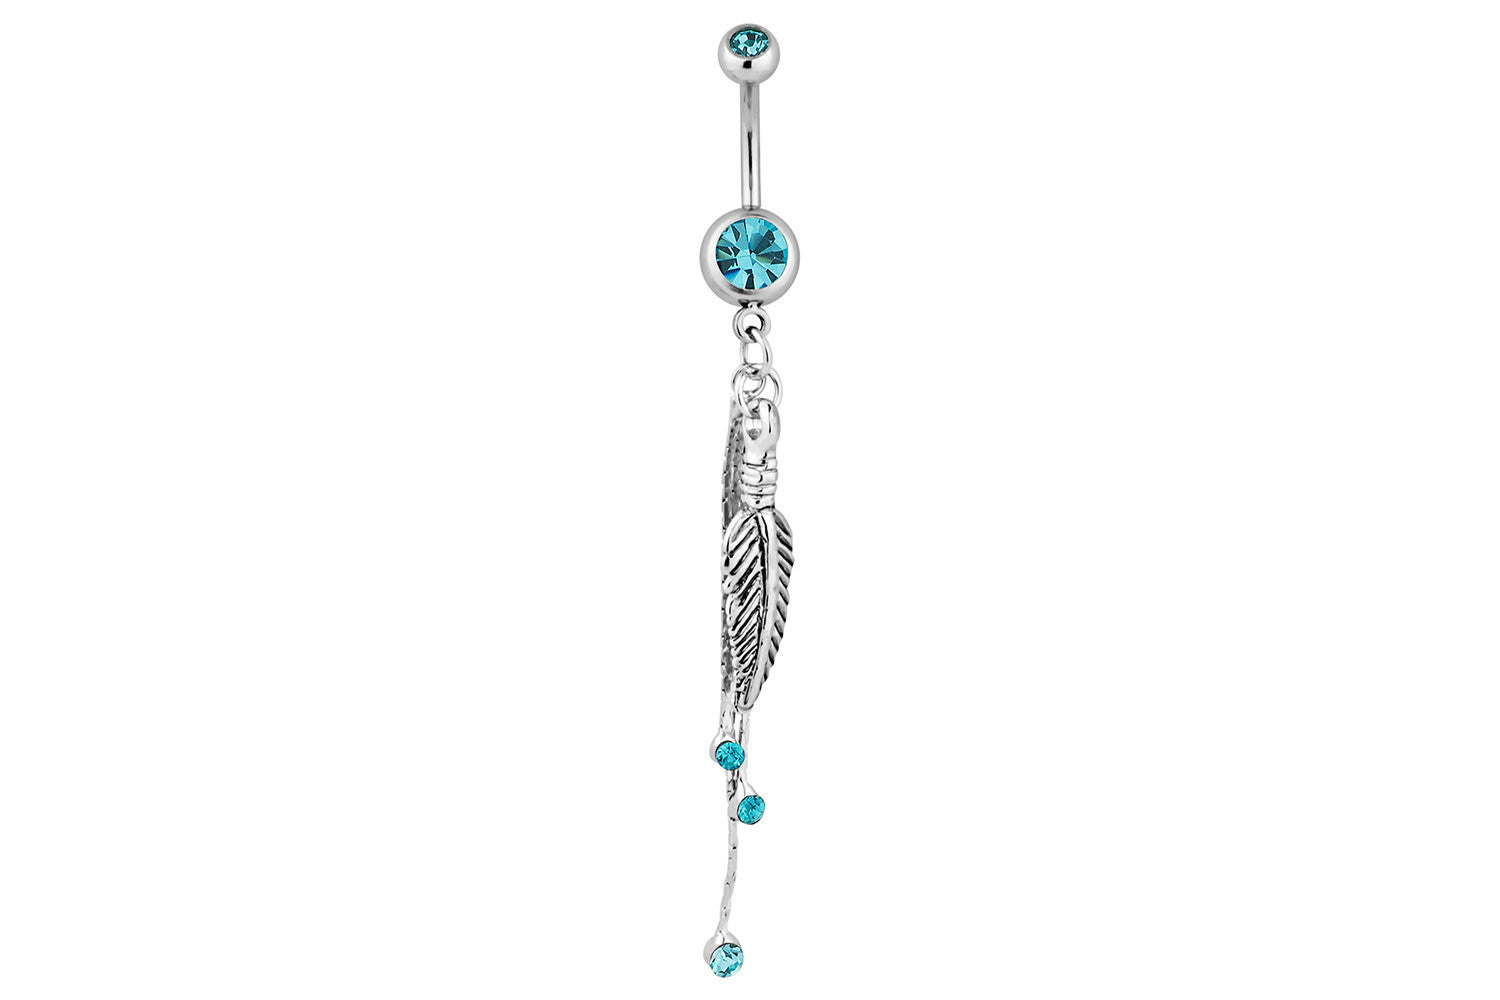 Light Blue Double Gem Belly Ring with Feathers